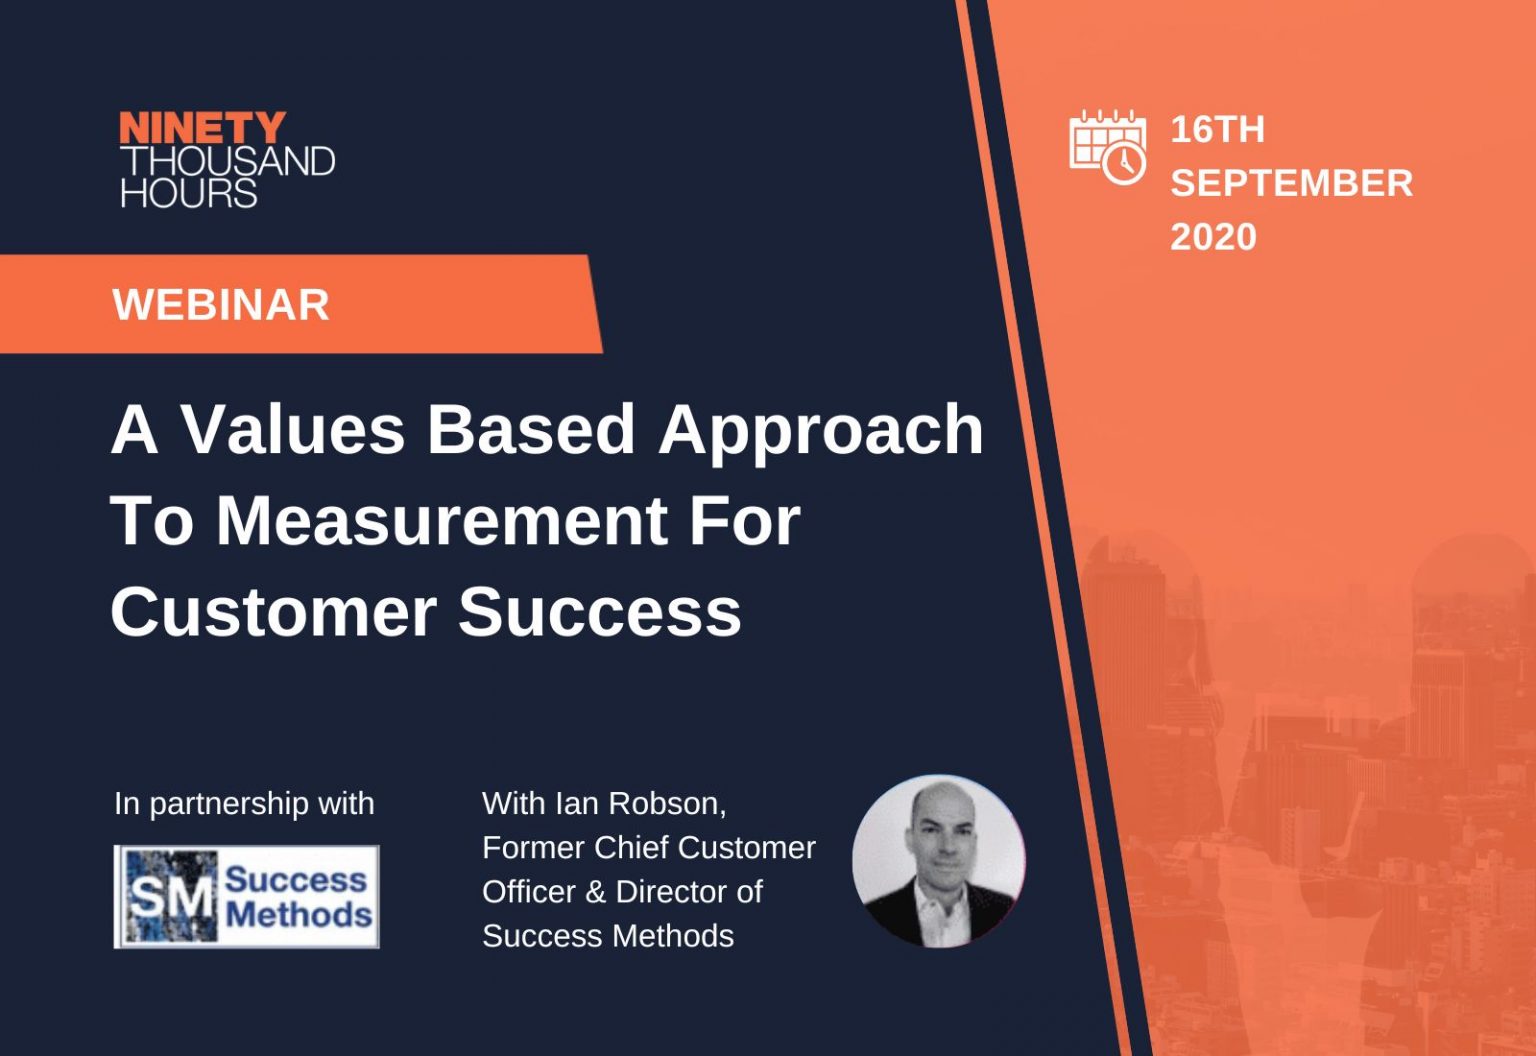 A Values Based Approach To Measurement For Customer Success